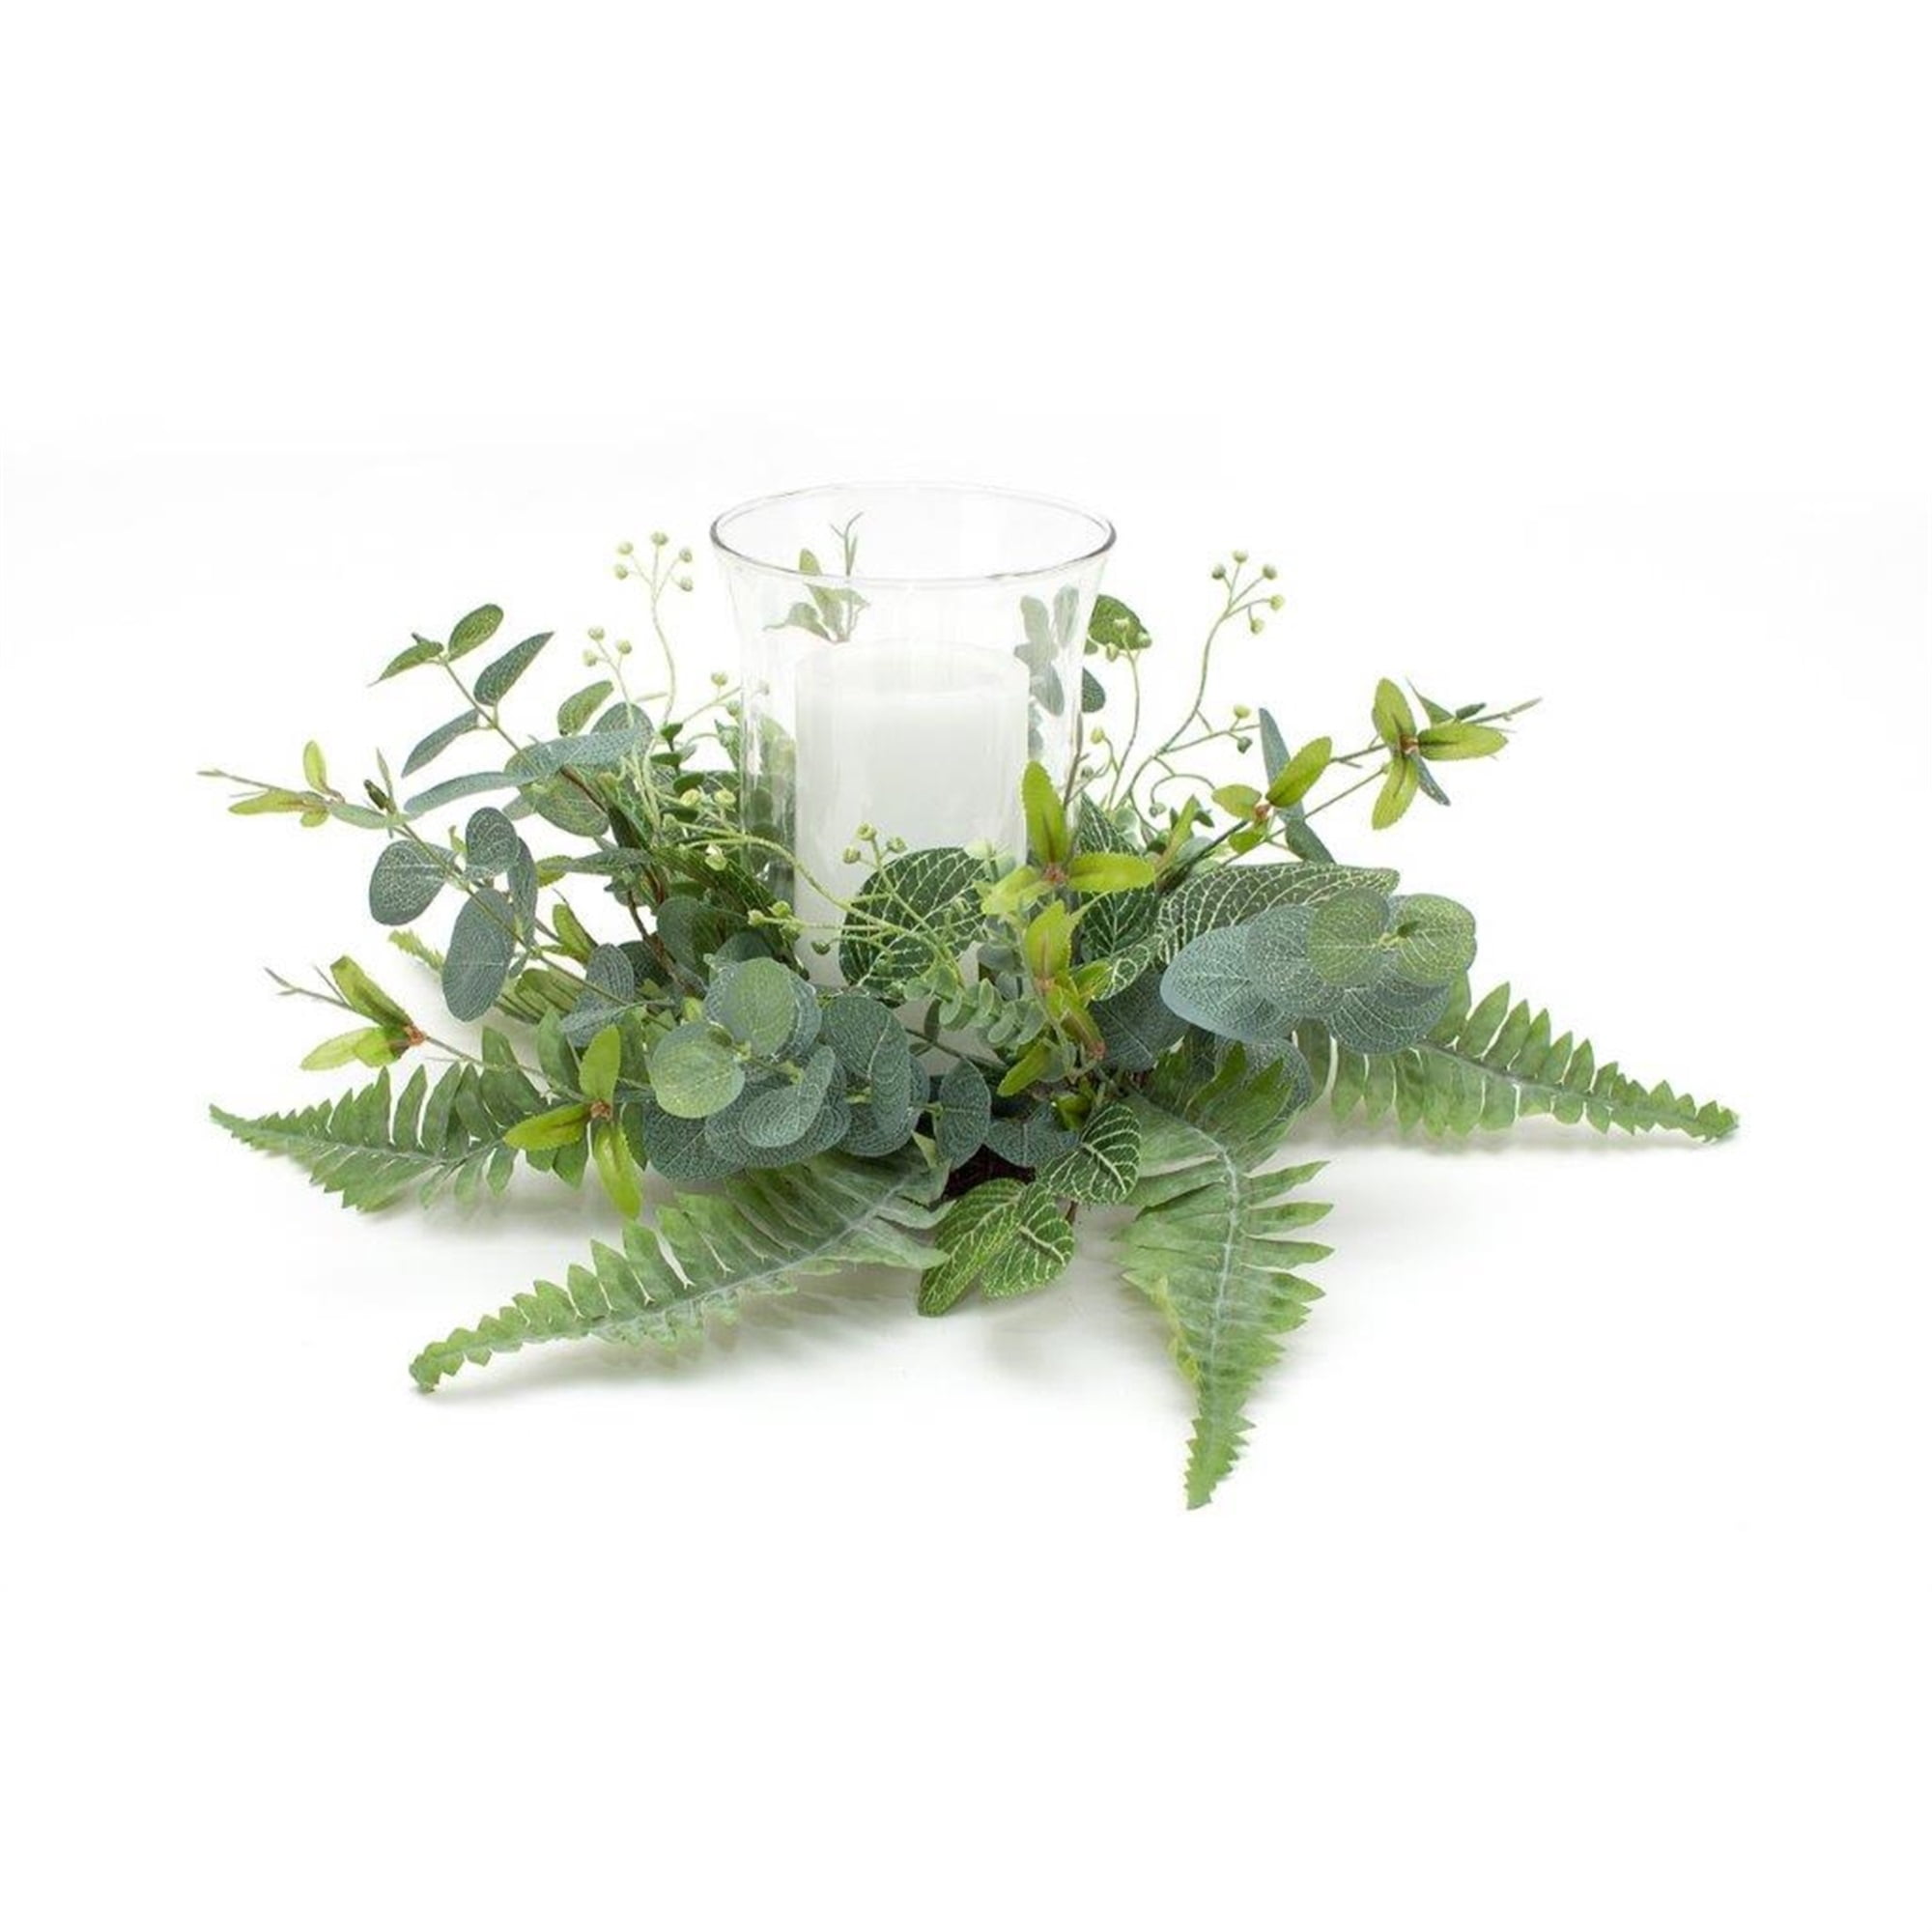 Mixed Foliage Candle Holder 14.25"D x 8.25"H Polyester/Glass